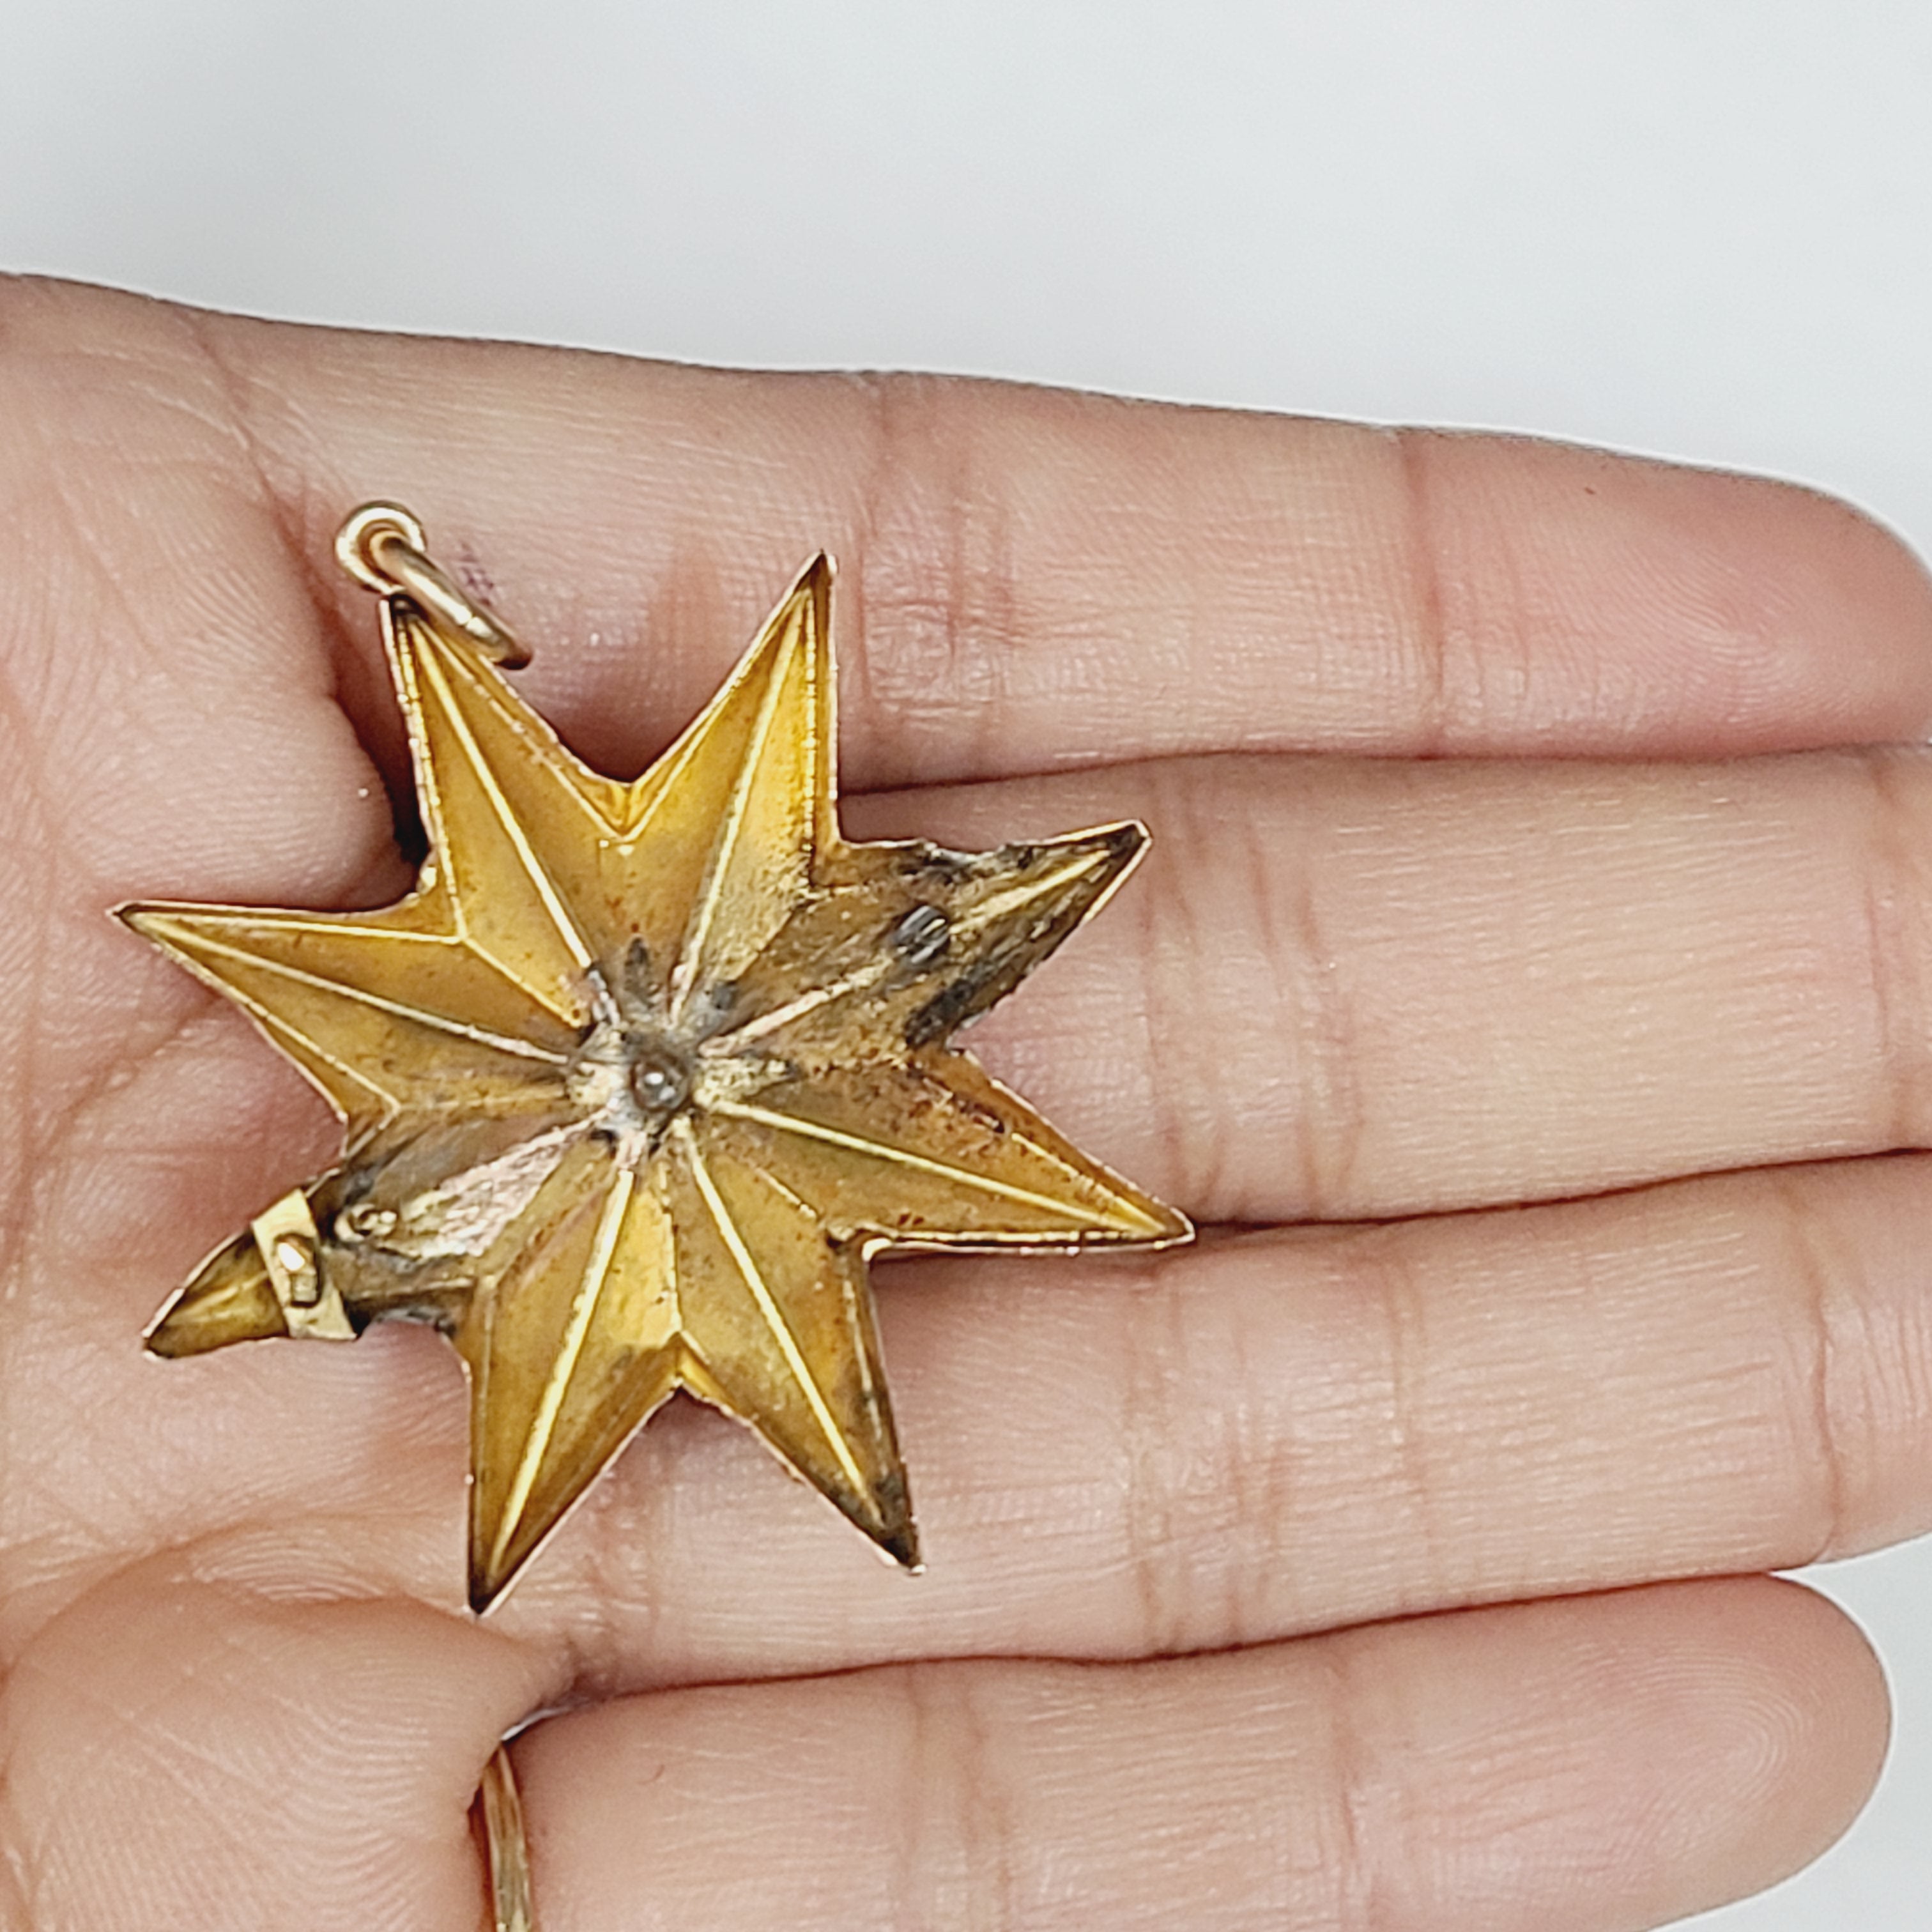 18K Gold Antique Enamel Portrait Star with Seed Pearls